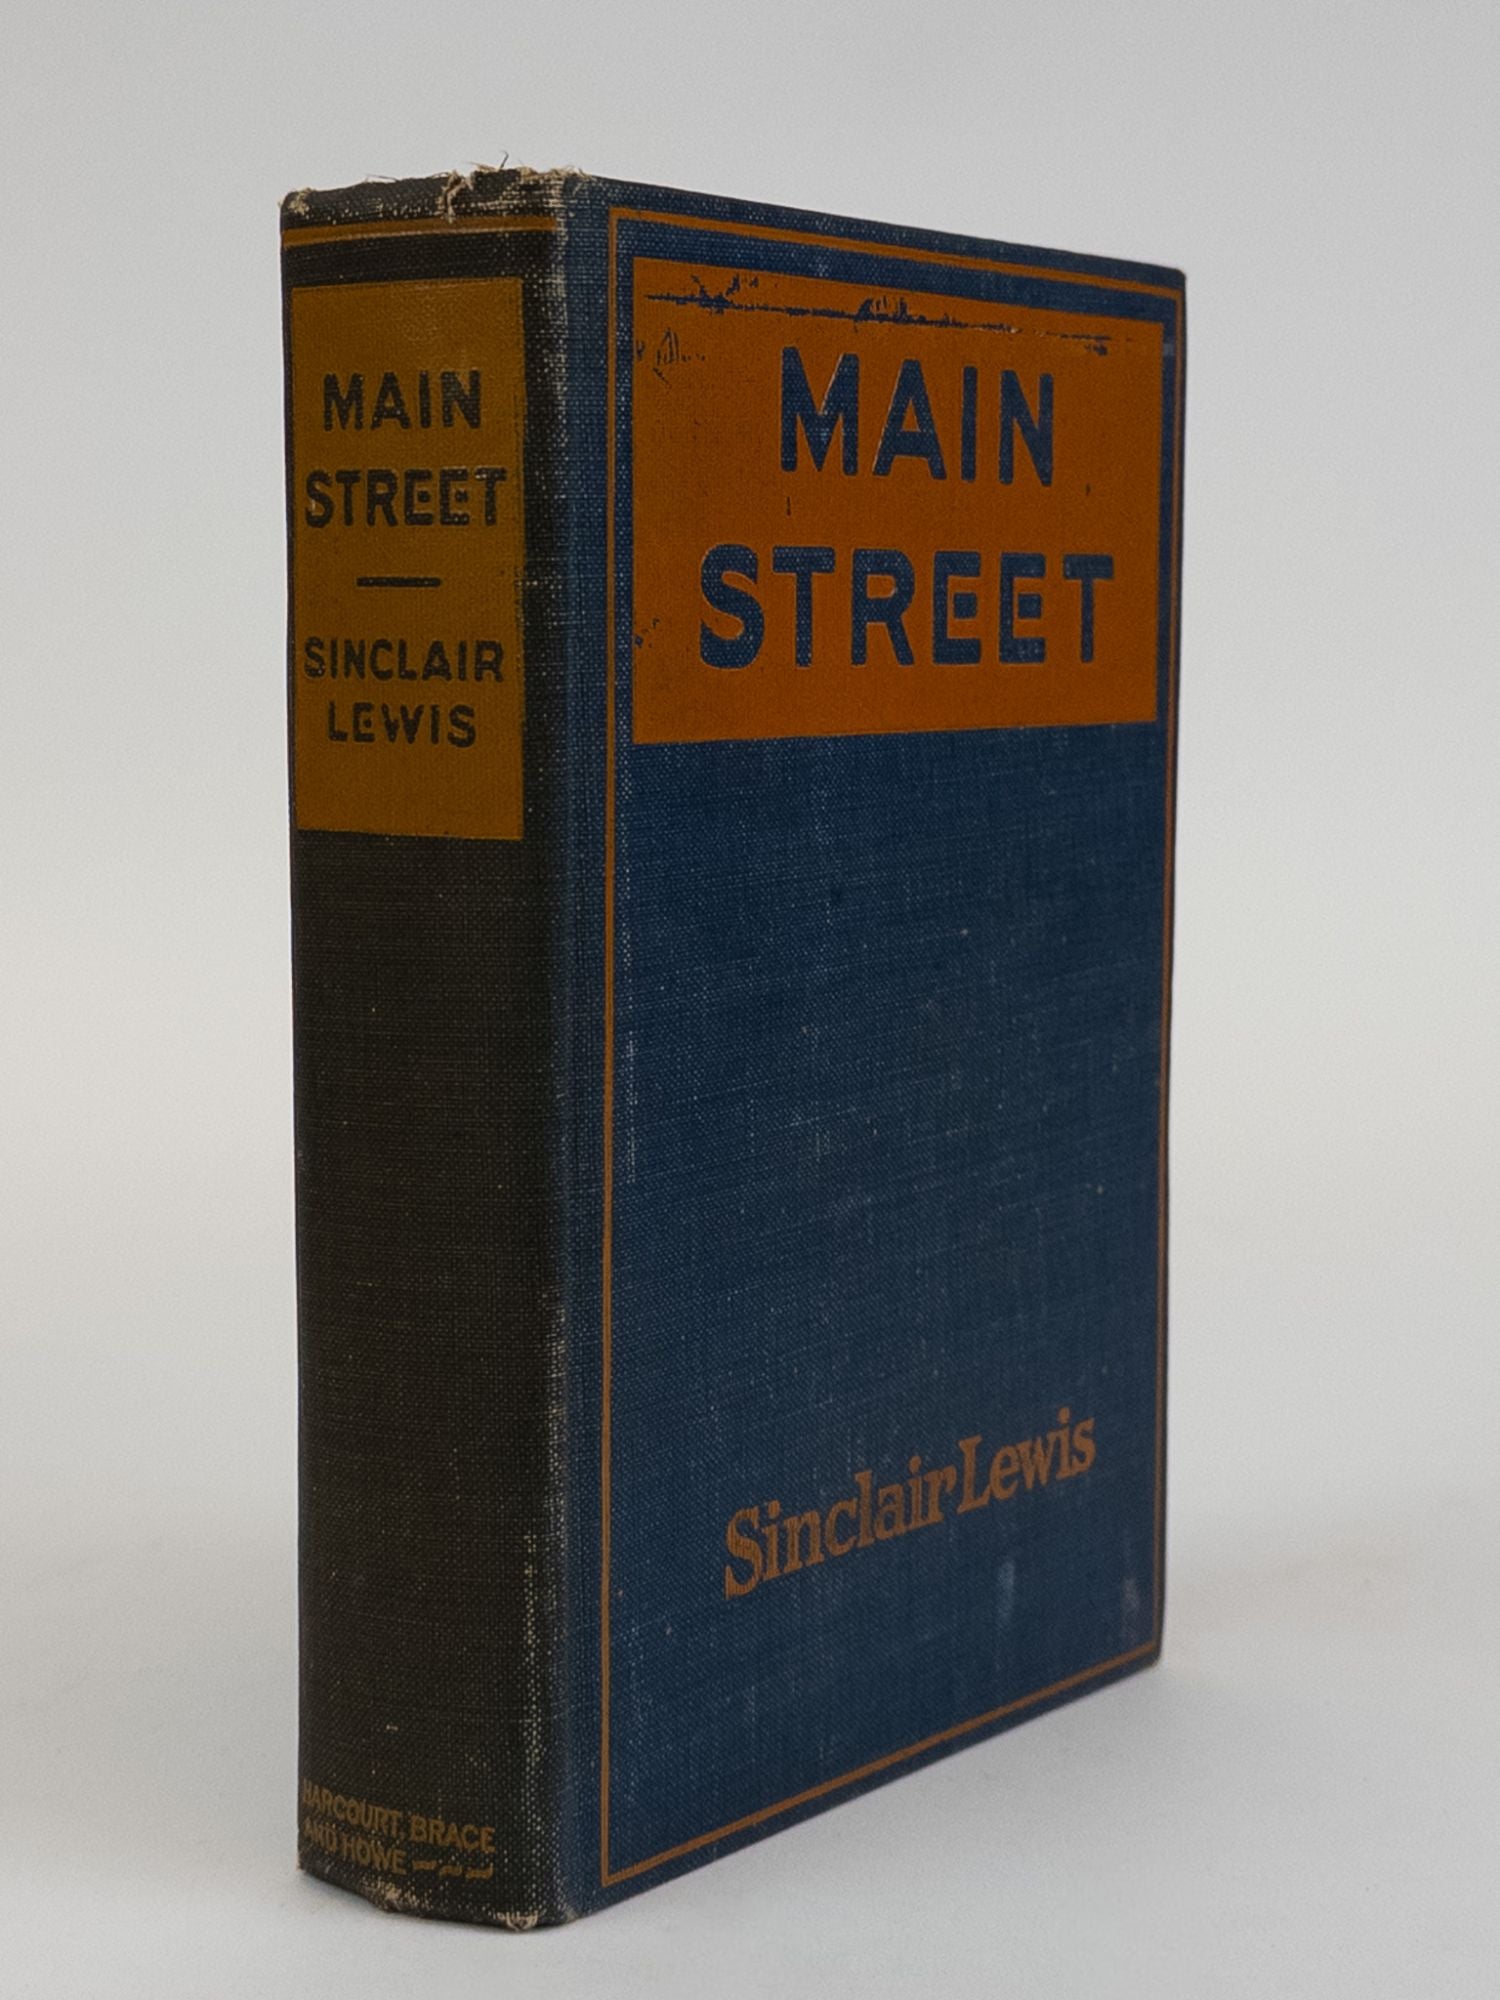 Product Image for MAIN STREET